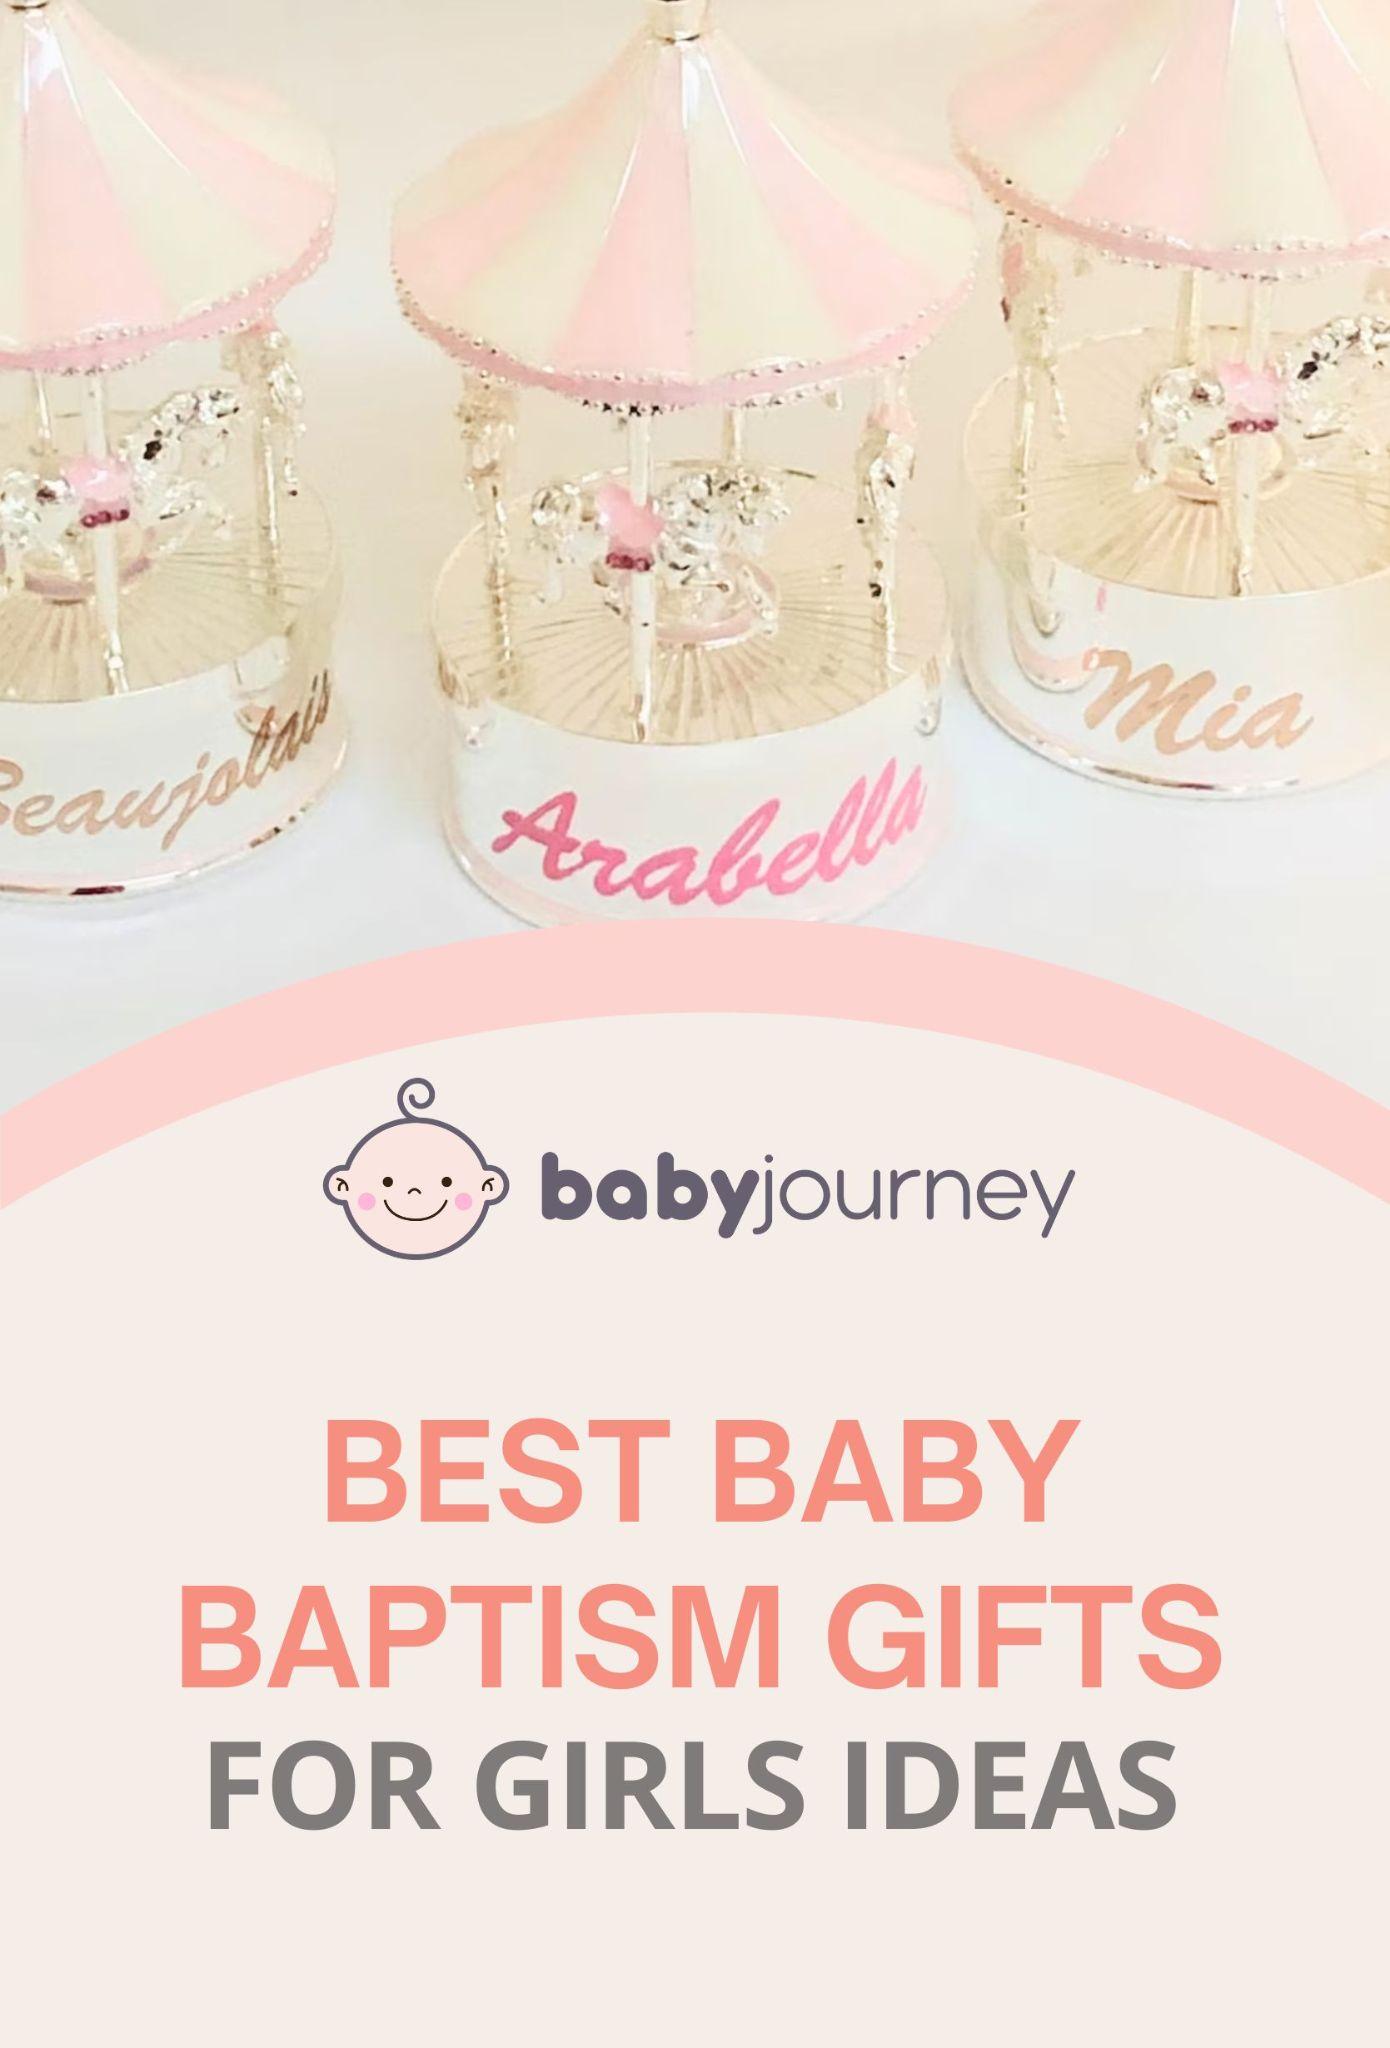 Best Baby Baptism Gifts for Girls Ideas pinterest - Baby Journey